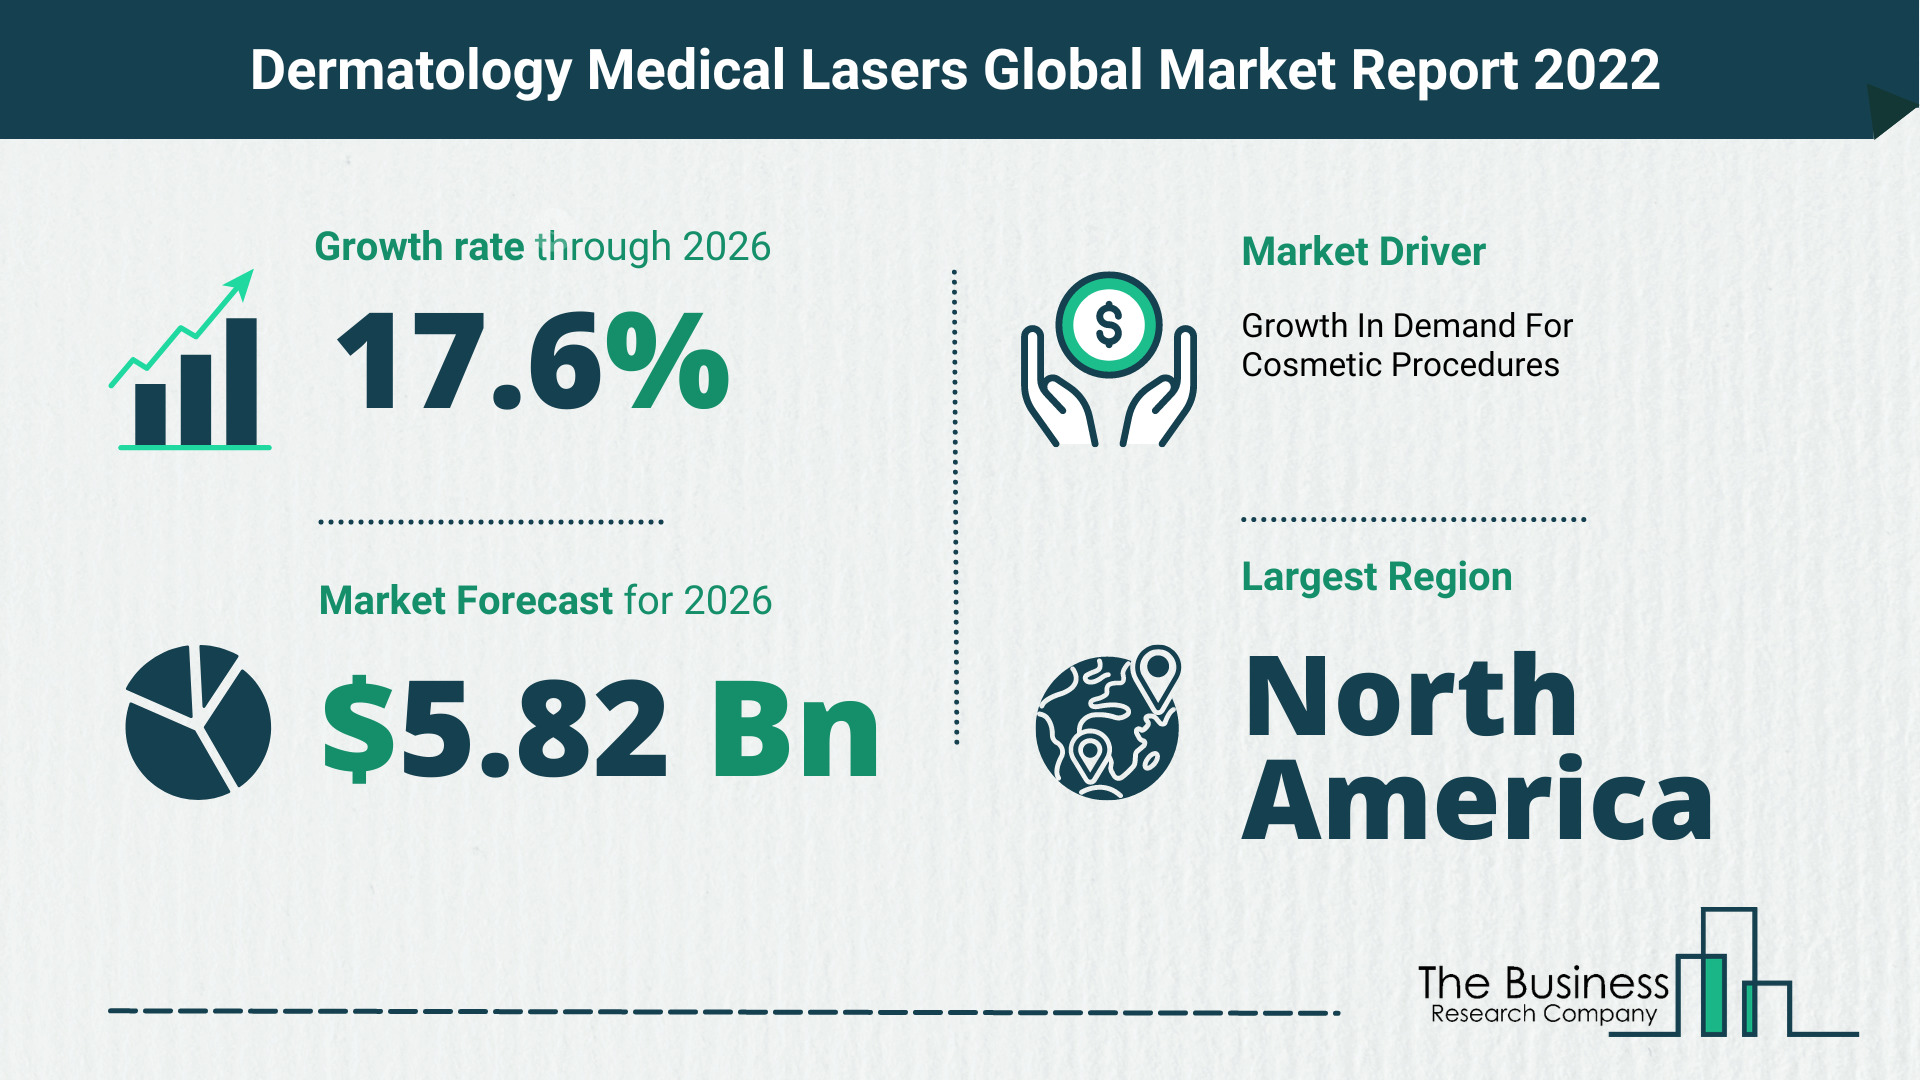 What Is The Dermatology Medical Lasers Market Overview In 2022?